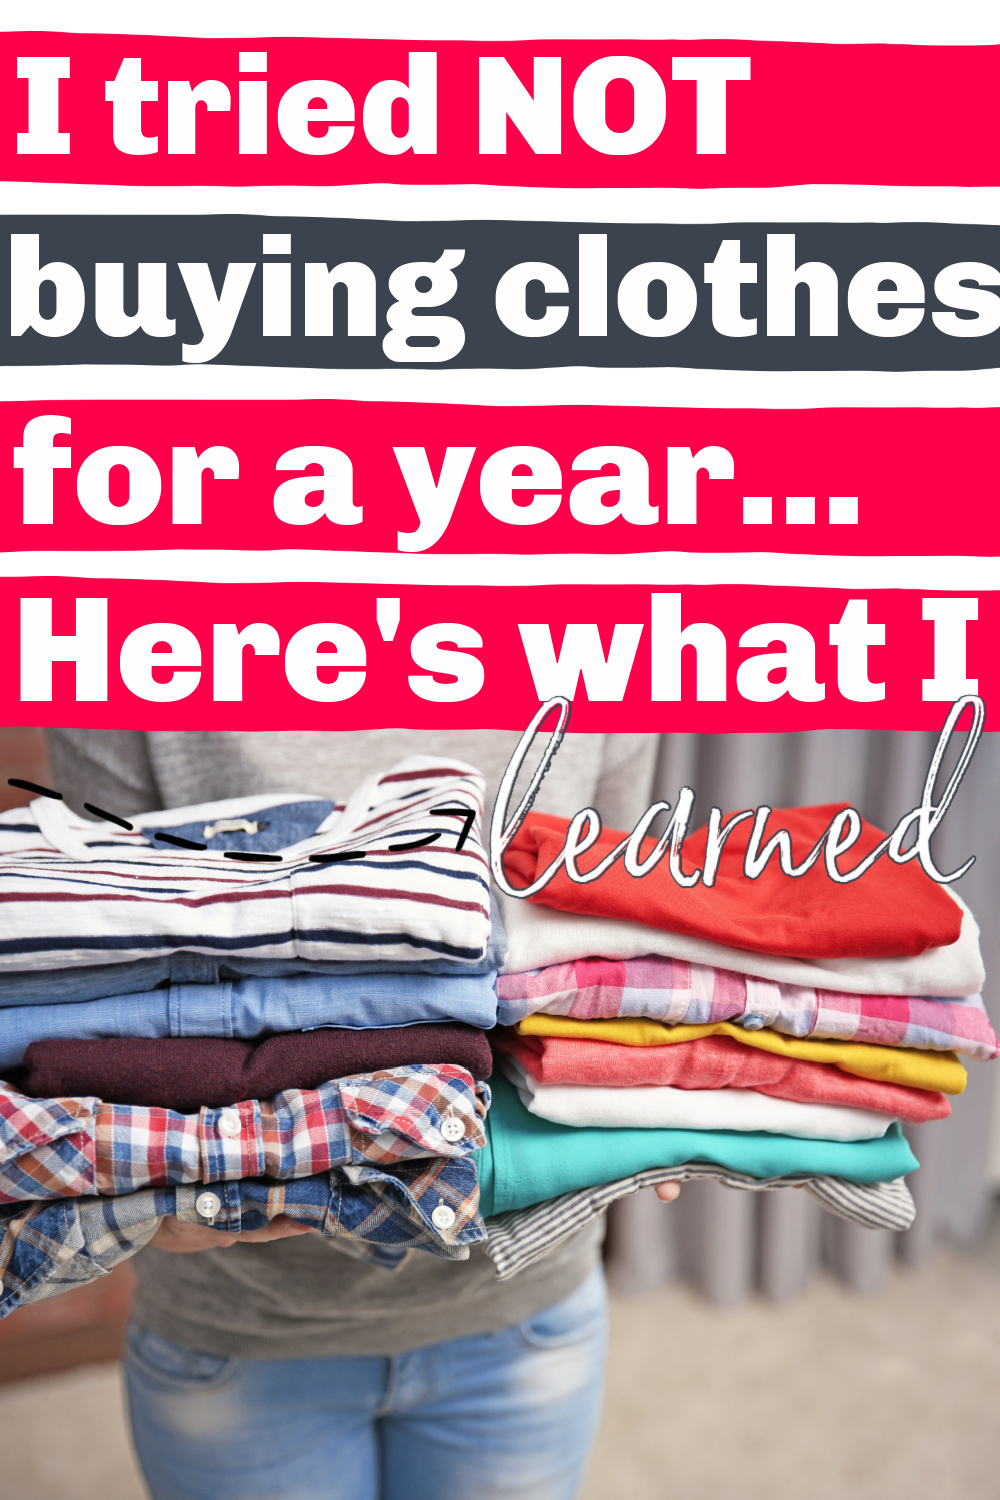 close up of stacks of folded clothes, with text overlay, "I tried not buying clothes for a year...here's what I learned"